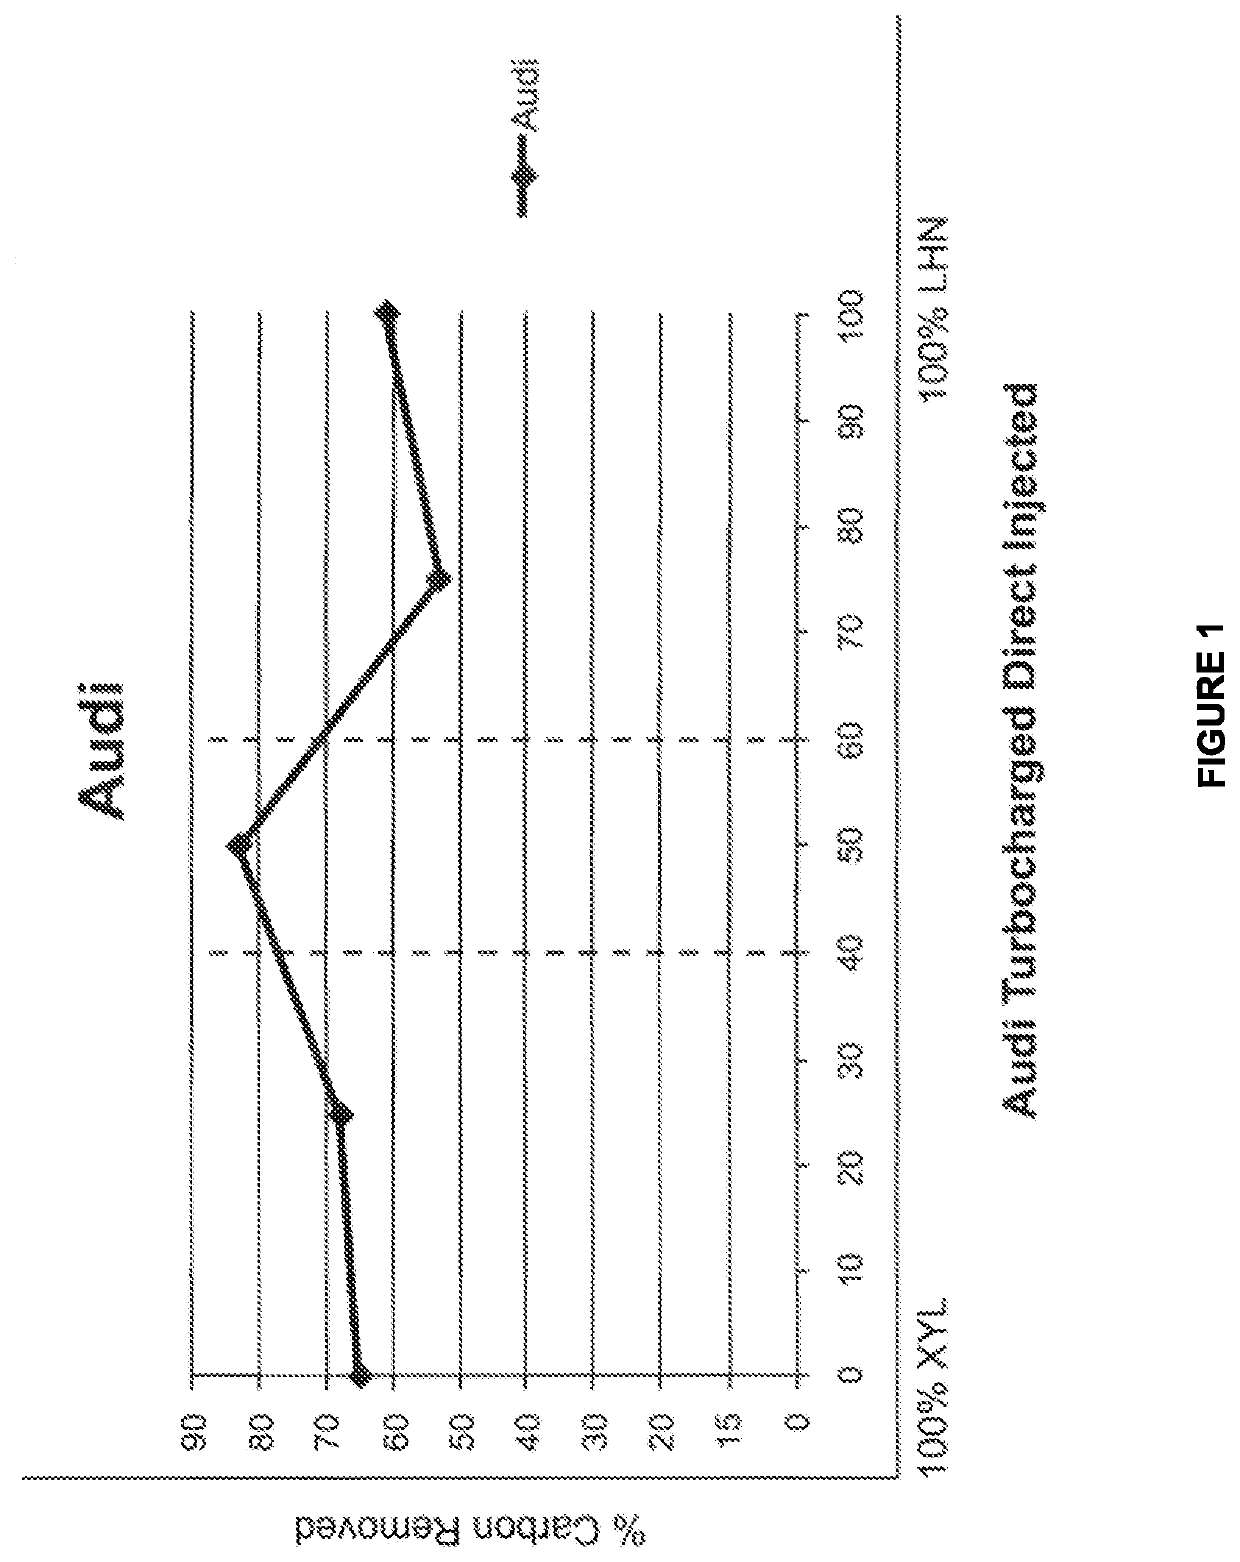 Compositions for Engine Carbon Removal and Methods and Apparatus for Removing Carbon - III - C1